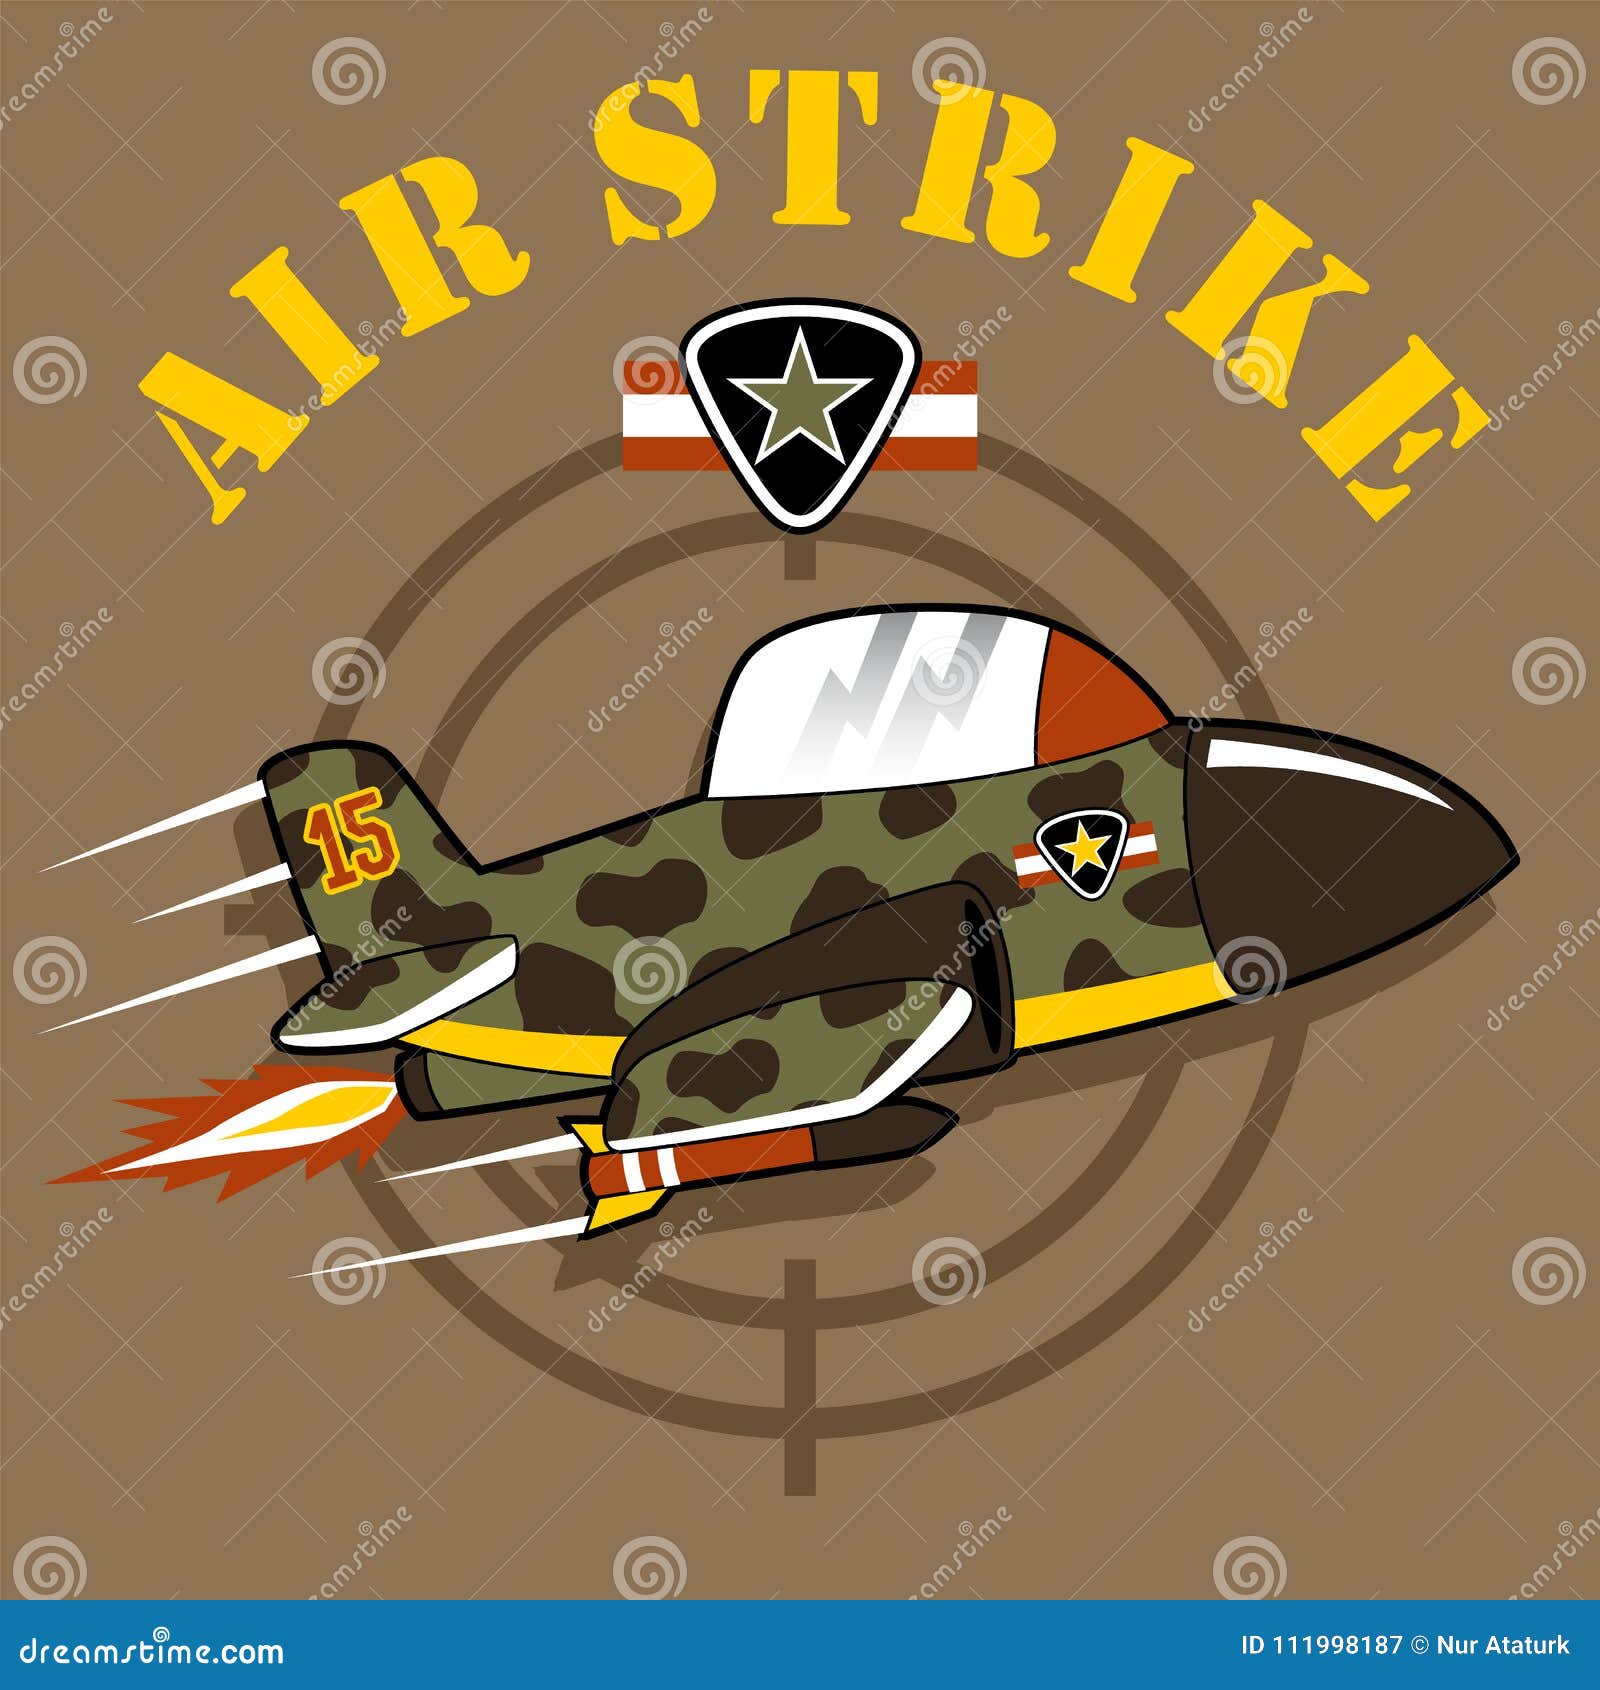 A Jet Cartoon on Military Air Show with Military Logo Stock Vector -  Illustration of icon, graphic: 111998187